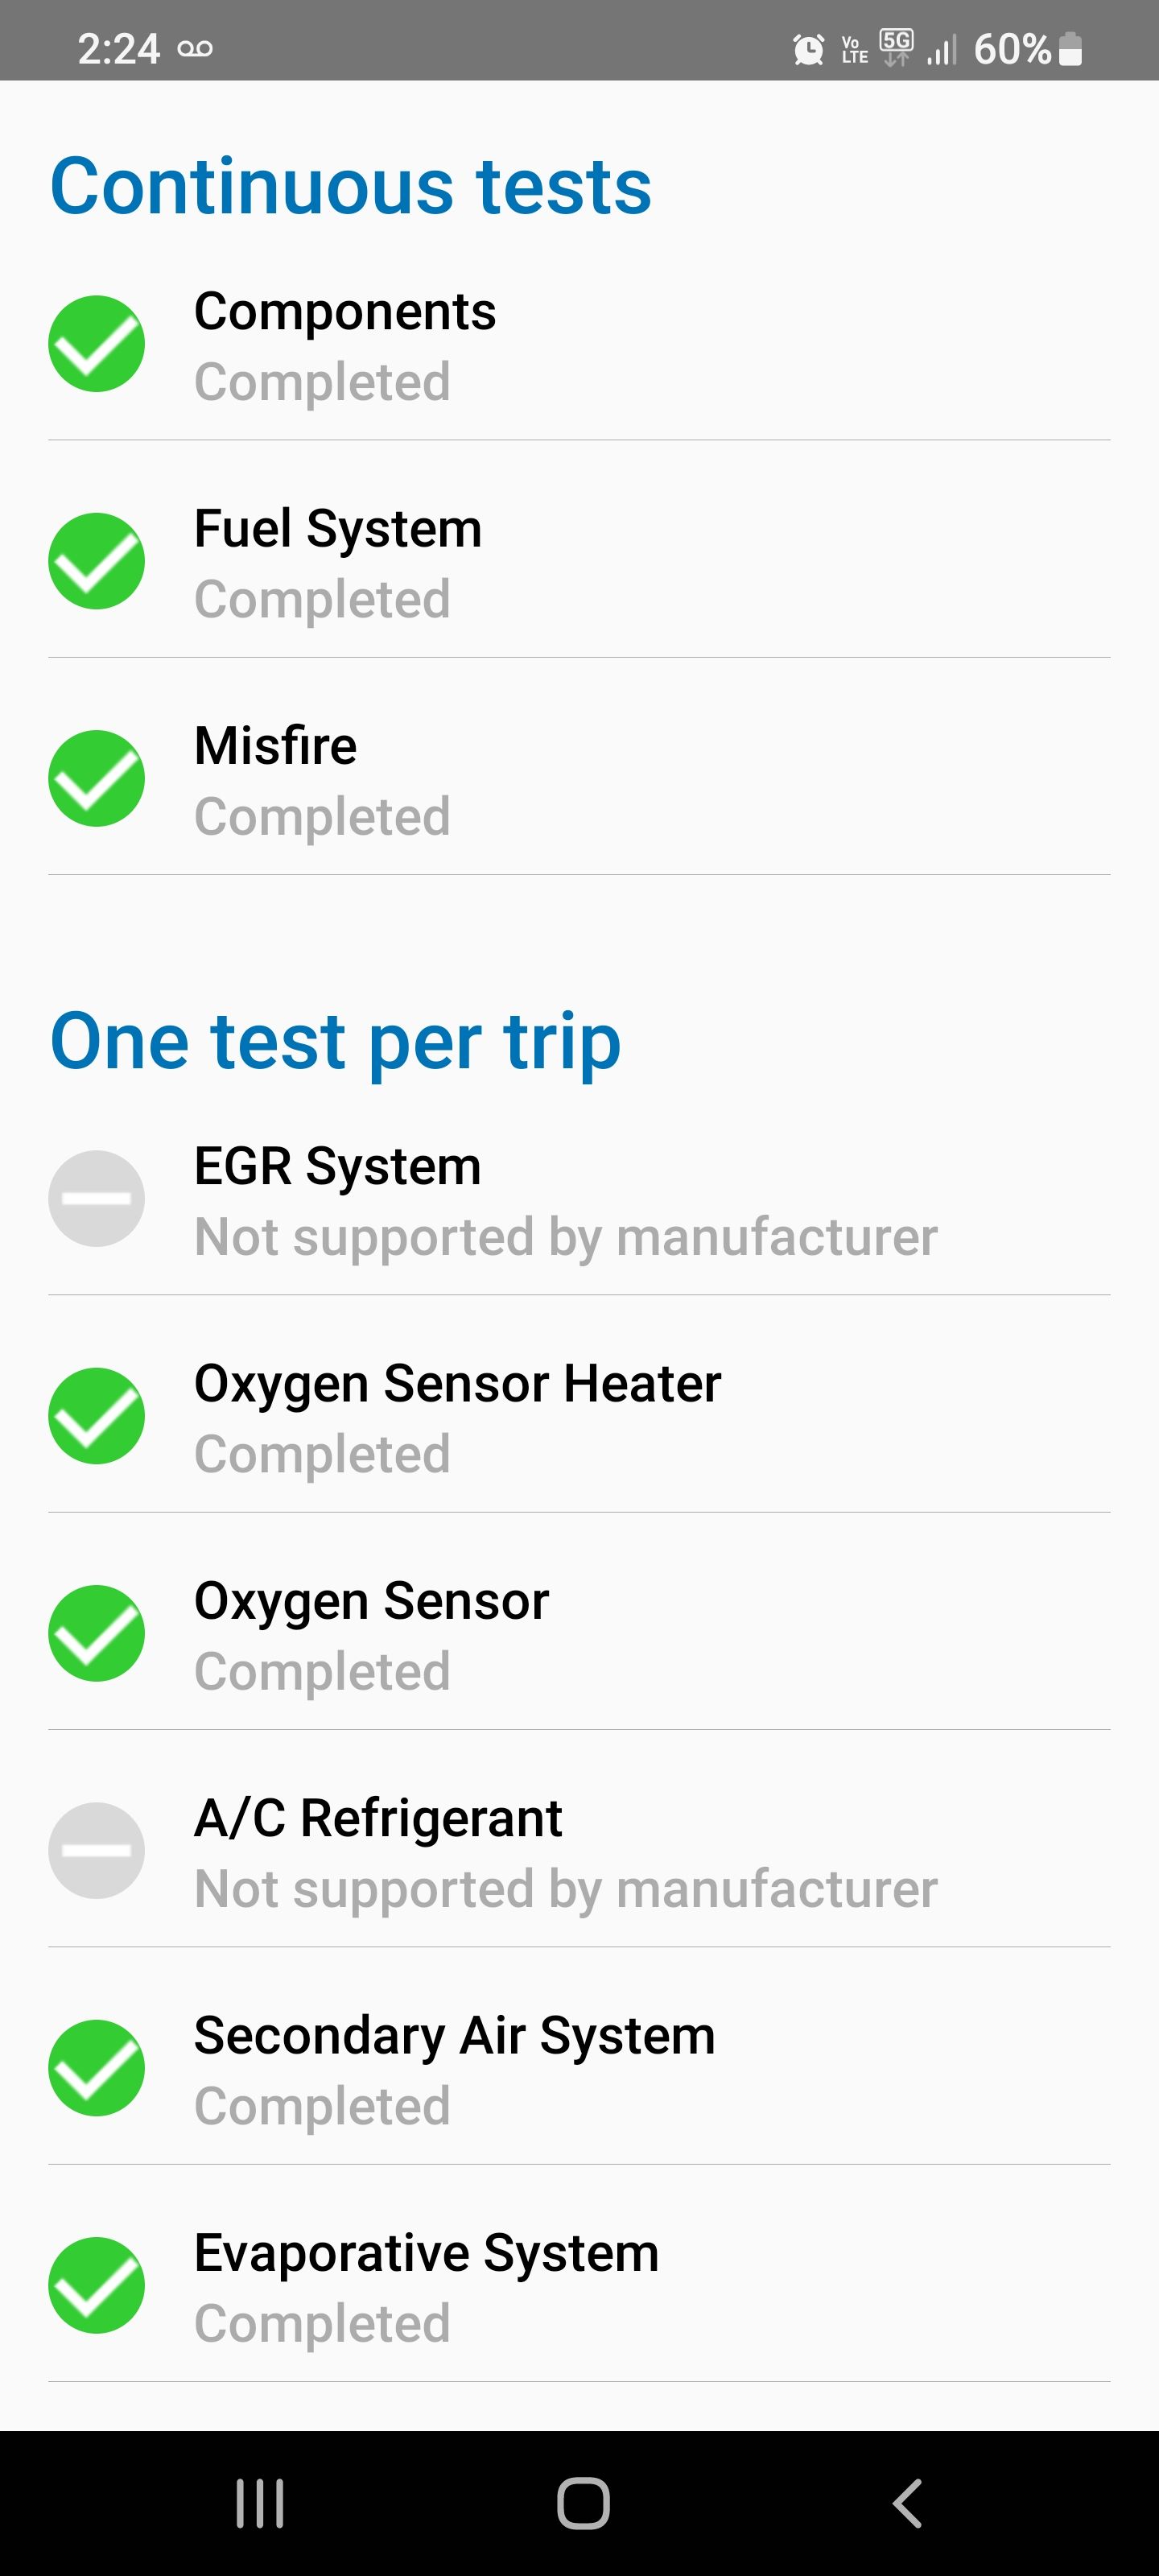 obd arny app screenshot showing window with continuous tests